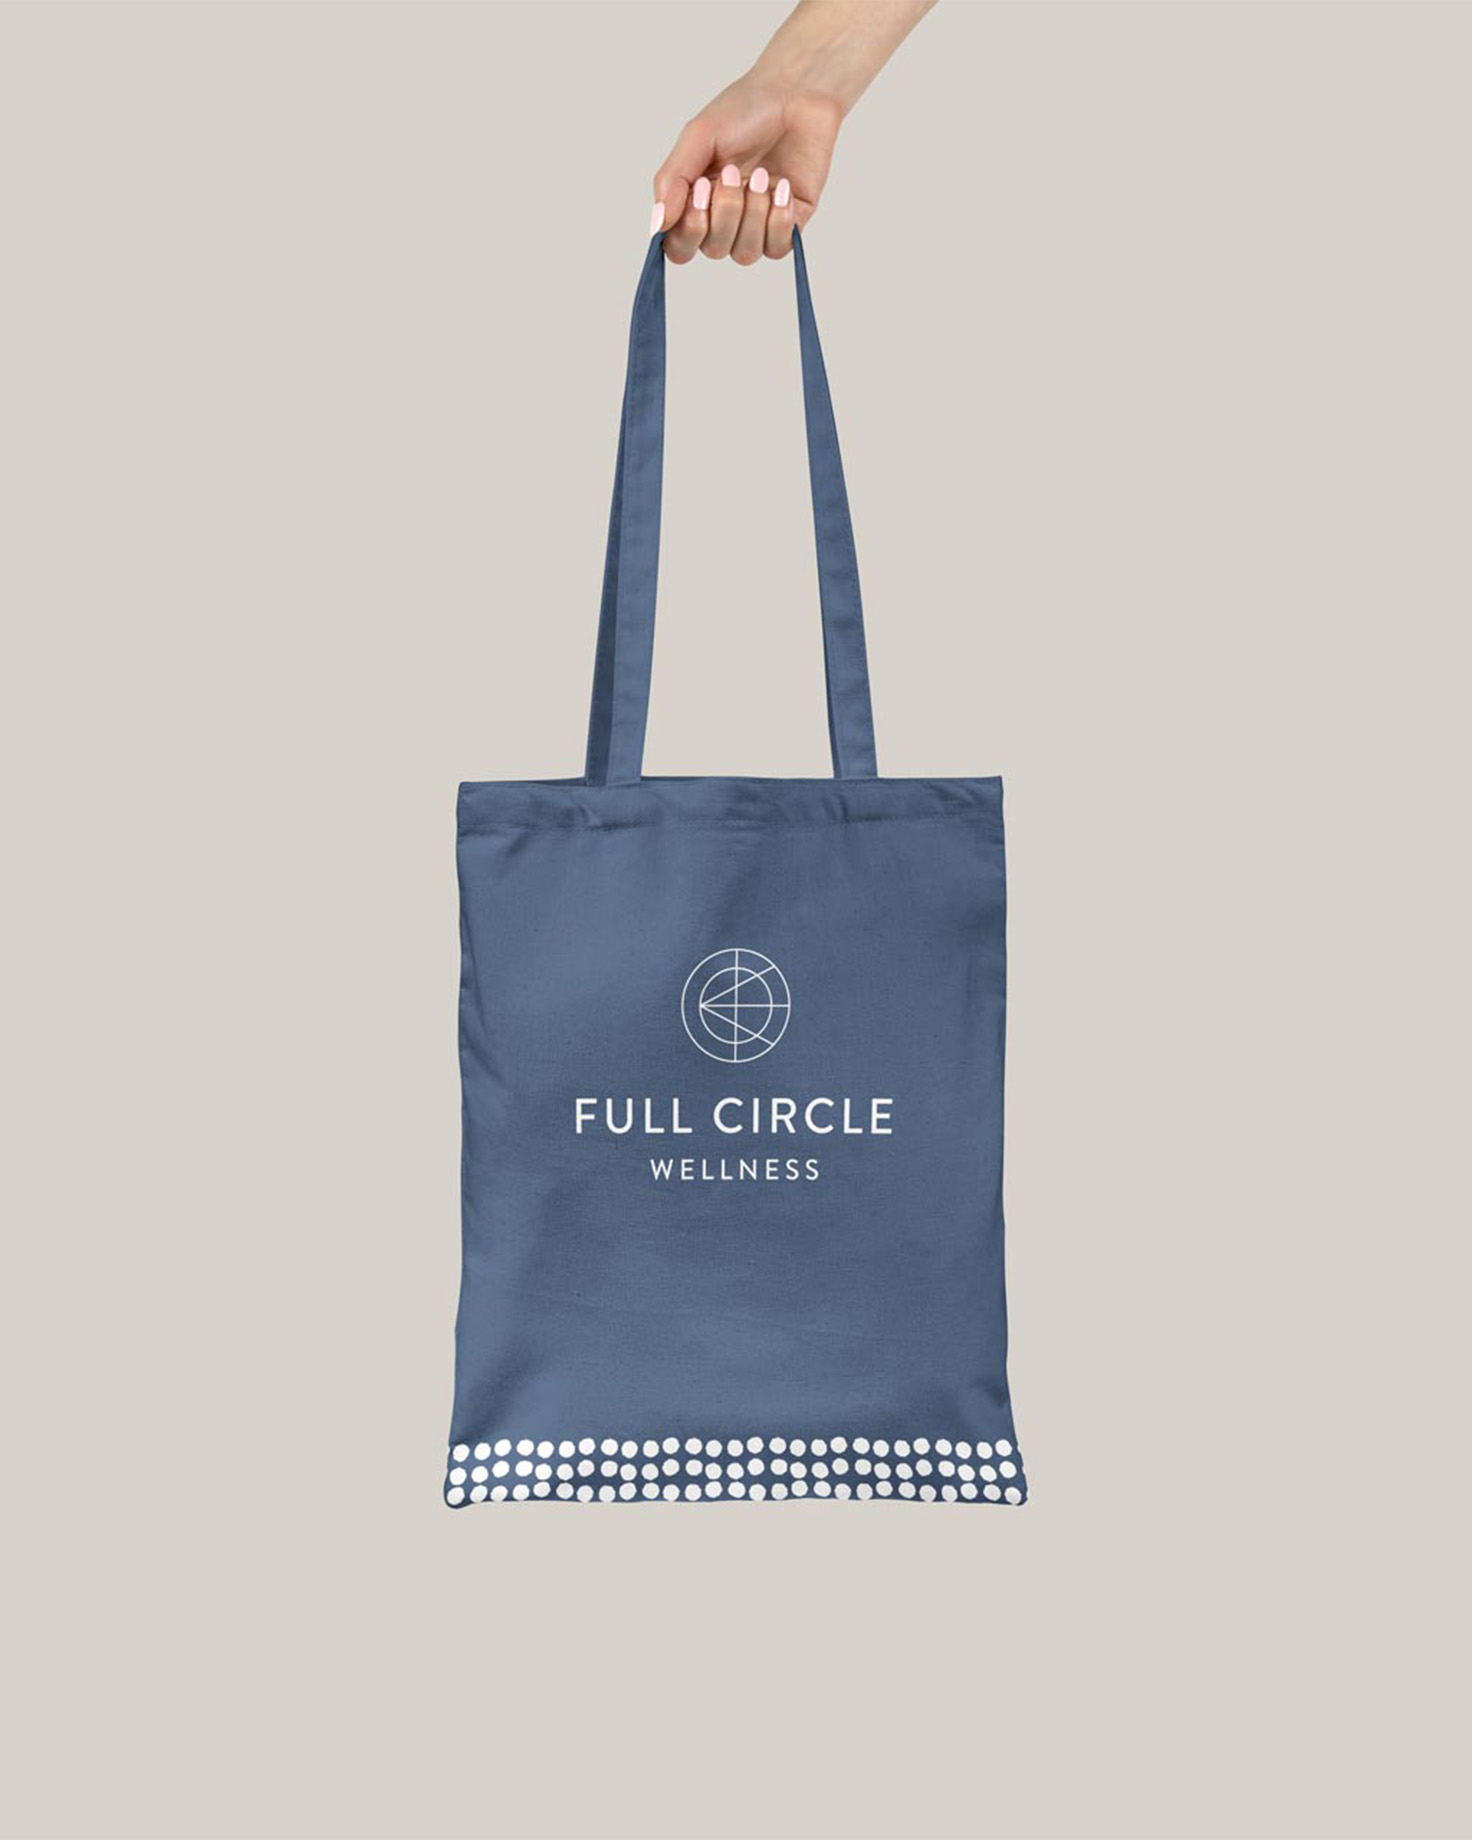 Bag Design mockup for Full Circle Wellness - Whiskey and Red Small Business Branding and Website Design Packages